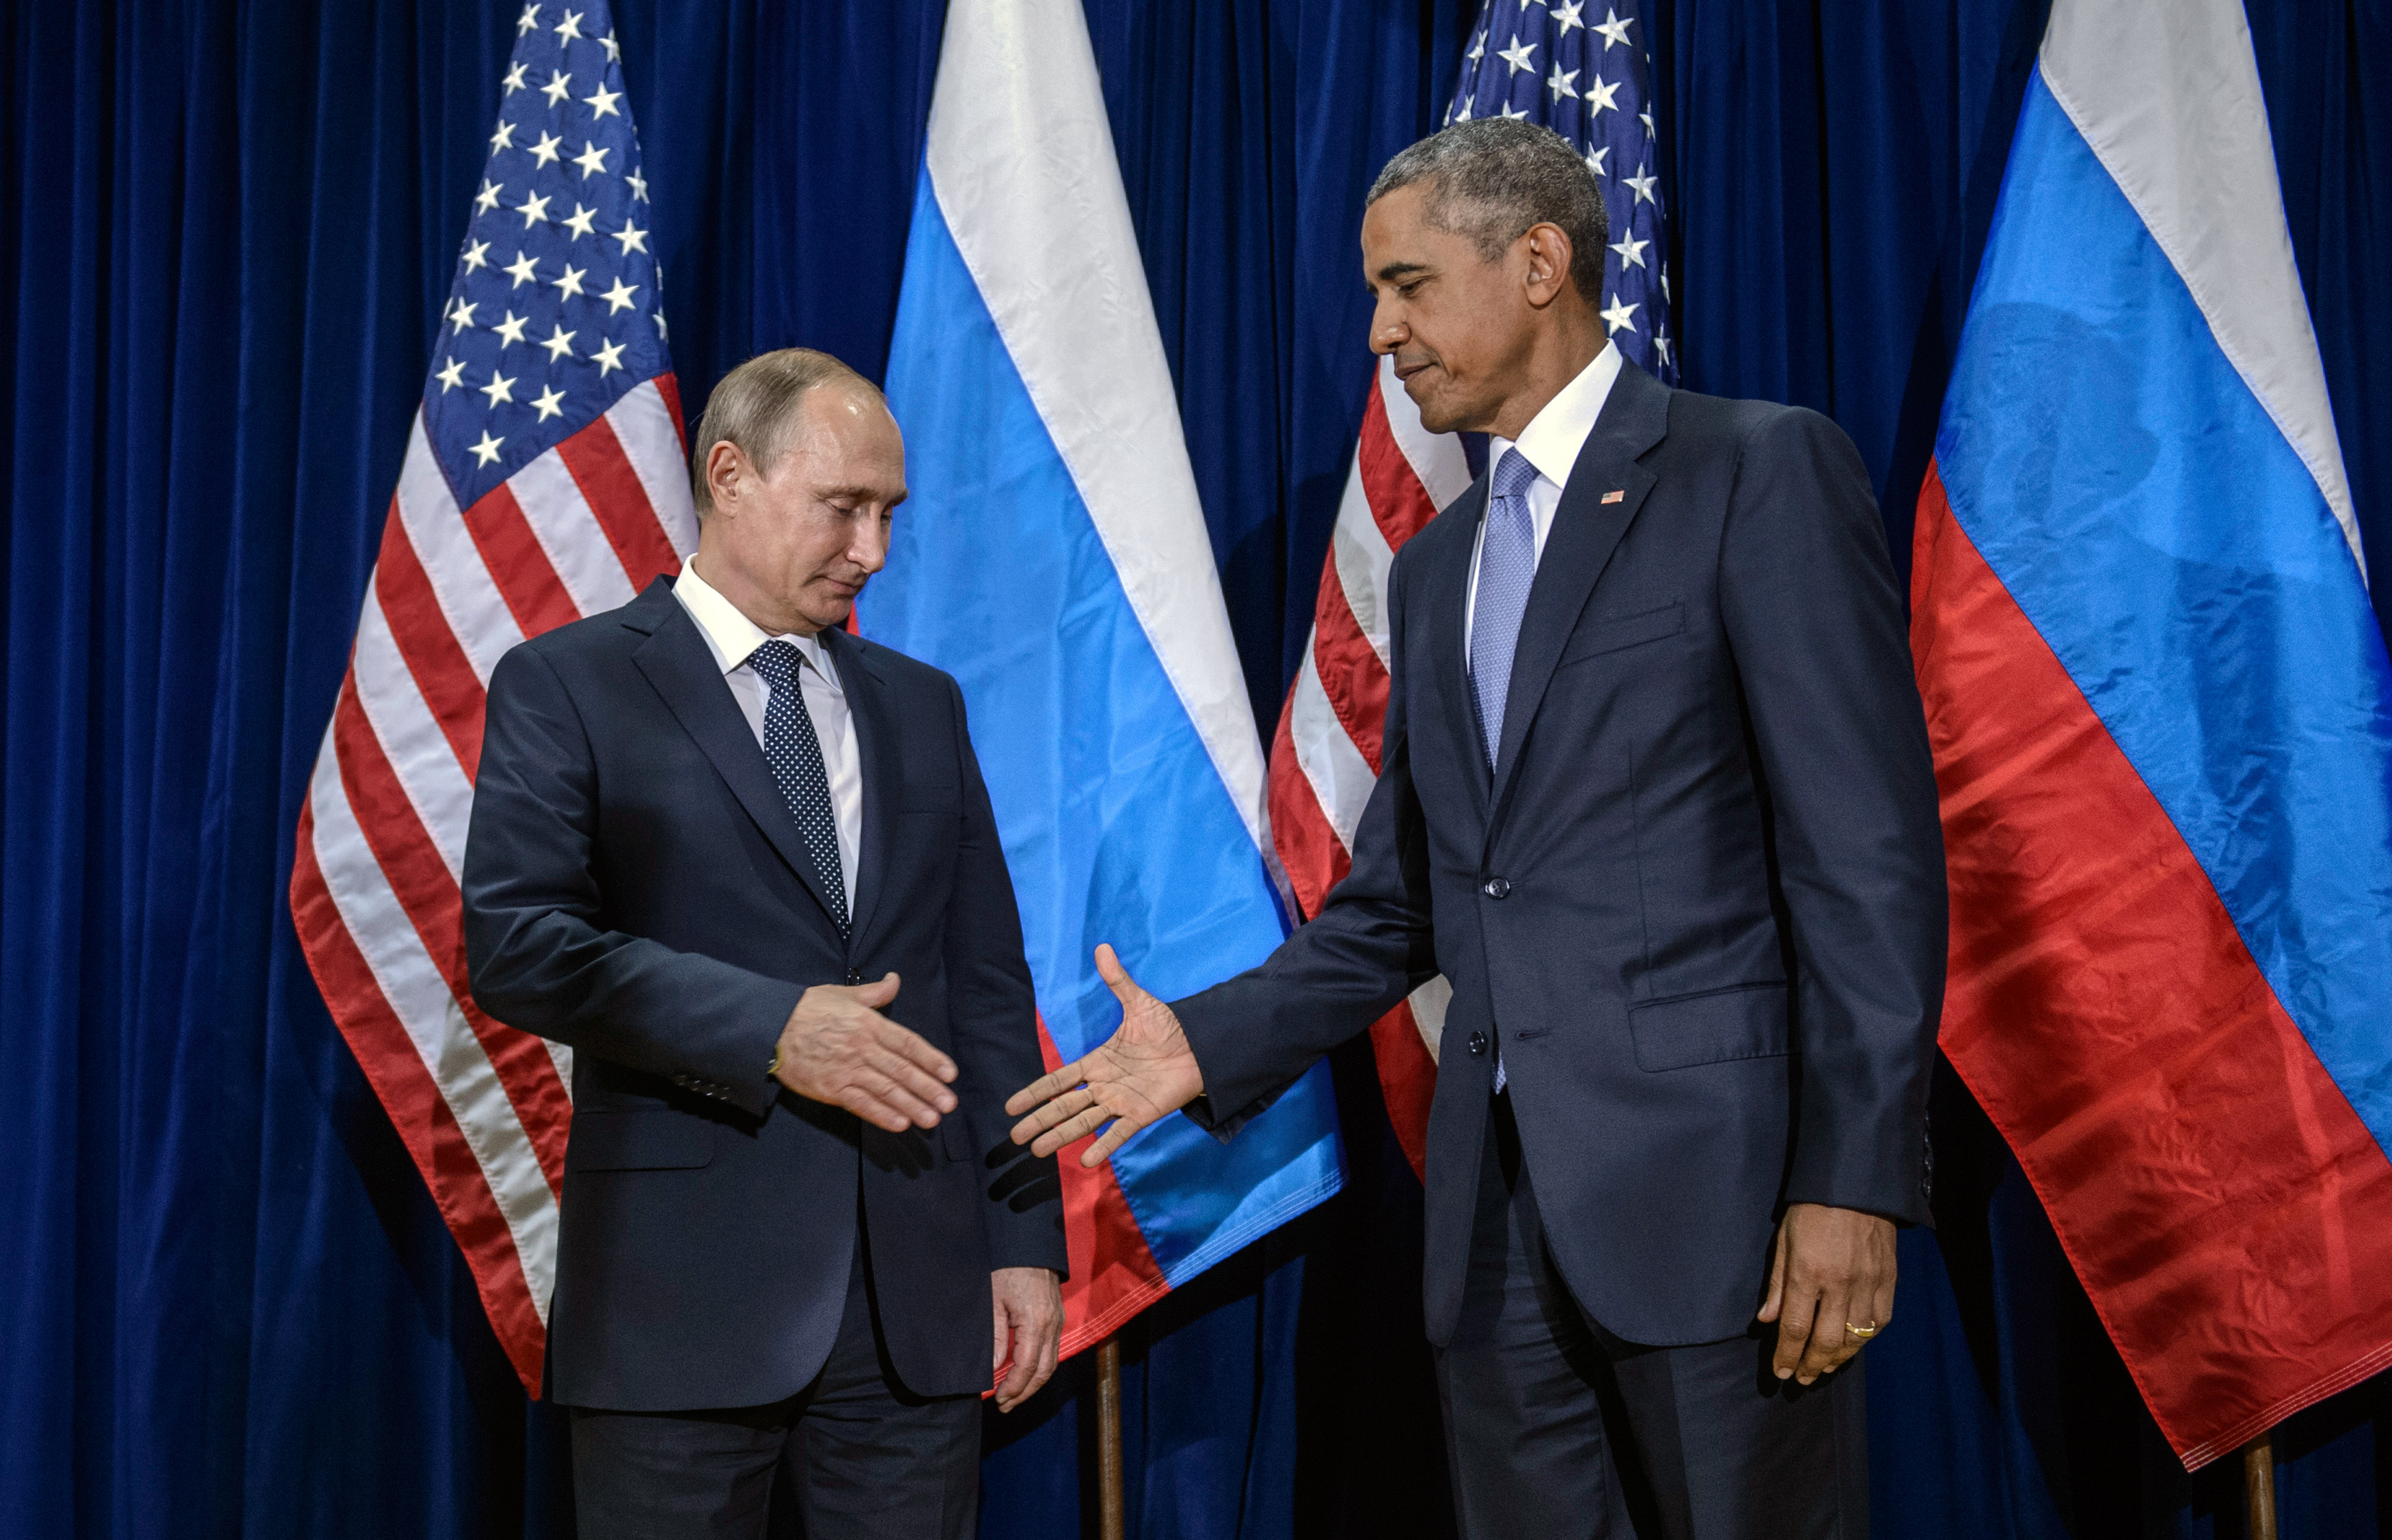 Russian President Vladimir Putin (L) and U.S. President Barack Obama shake hands for the cameras before the start of a bilateral meeting at the United Nations headquarters in New York City on Sept. 28, 2015.